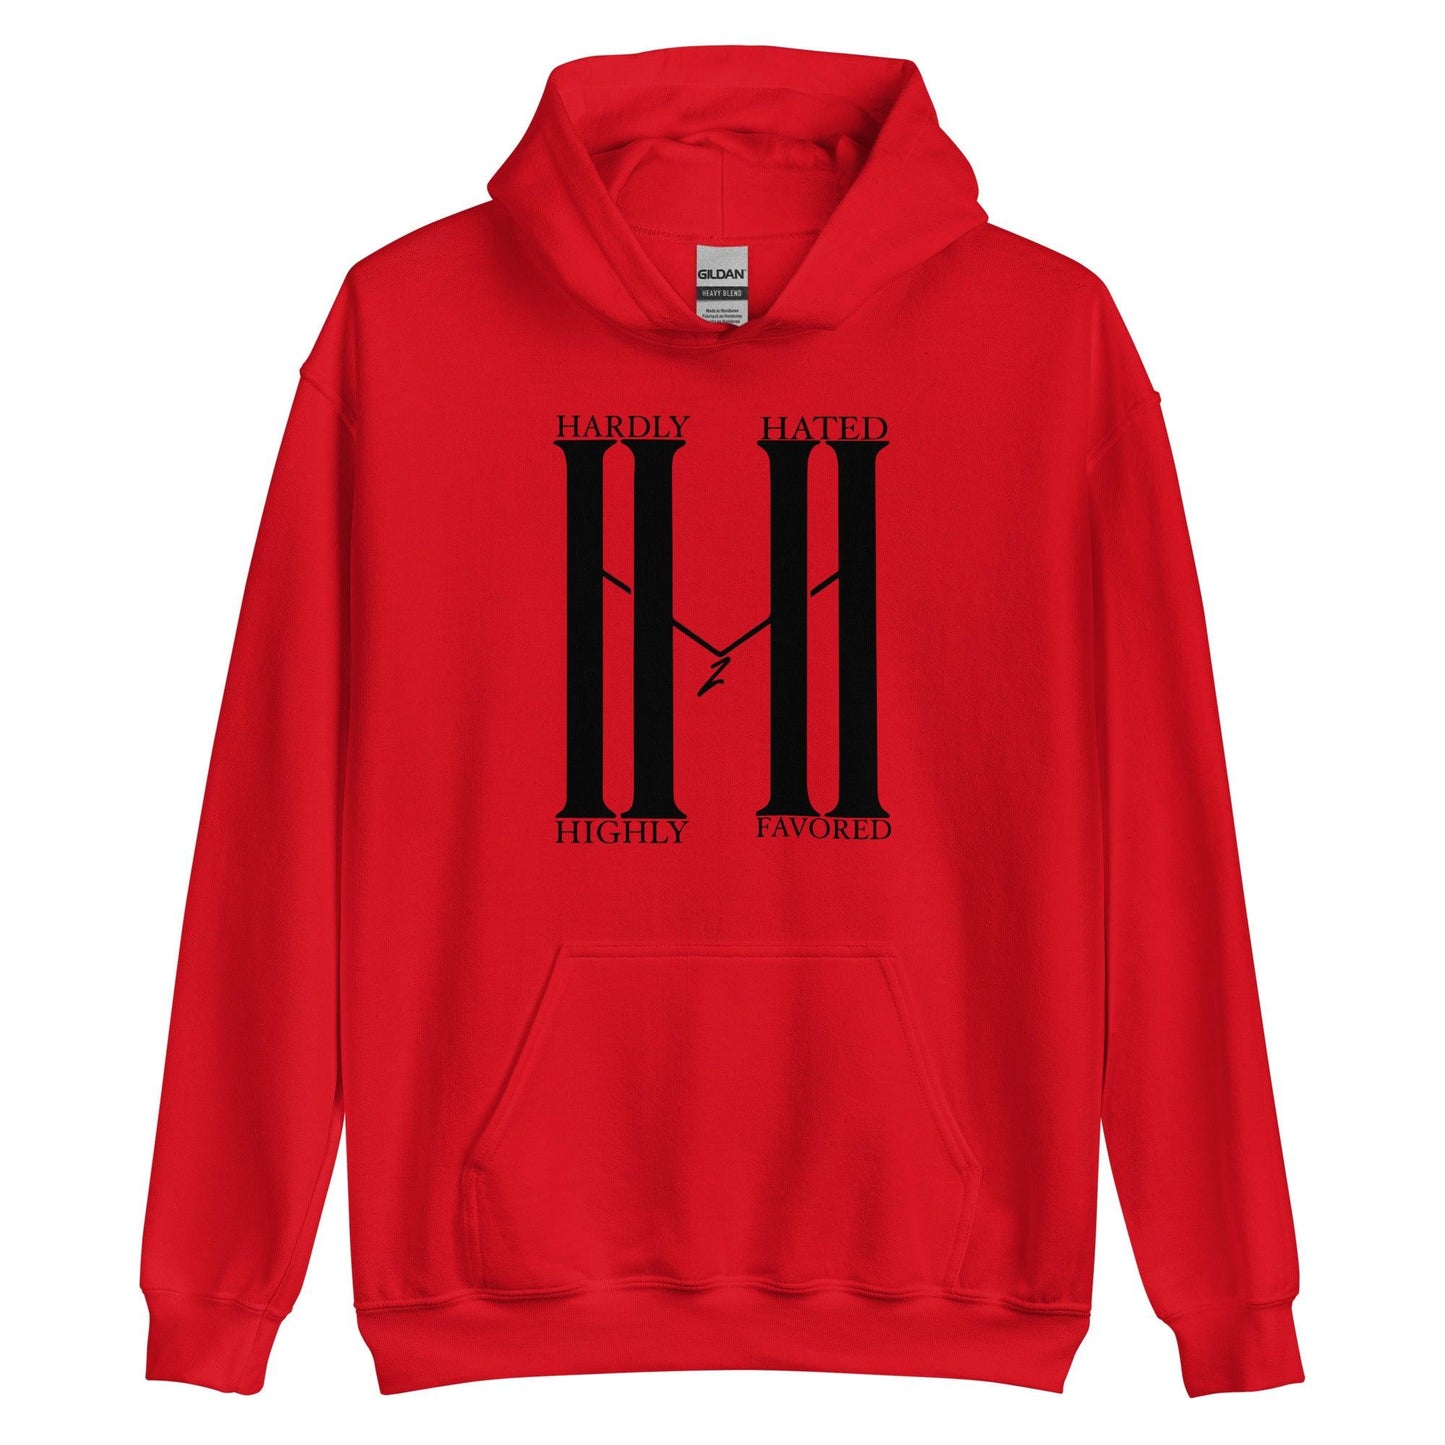 Daquan Jeffries "Highly Favored" Hoodie - Fan Arch